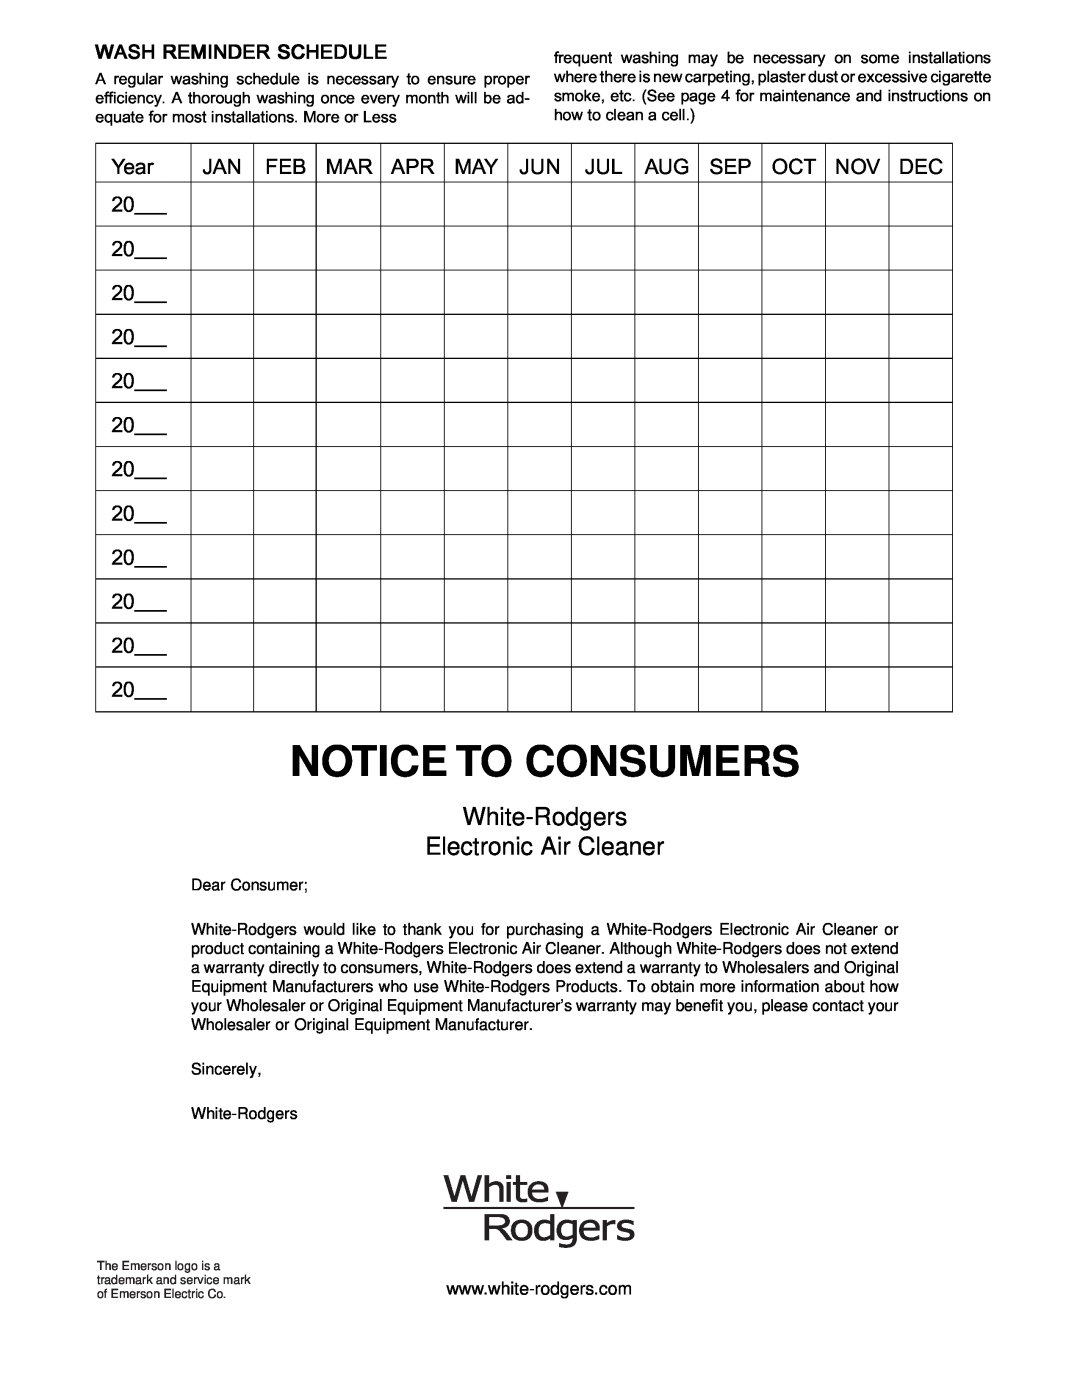 White Rodgers SSC1000 manual White-Rodgers Electronic Air Cleaner, Notice To Consumers 